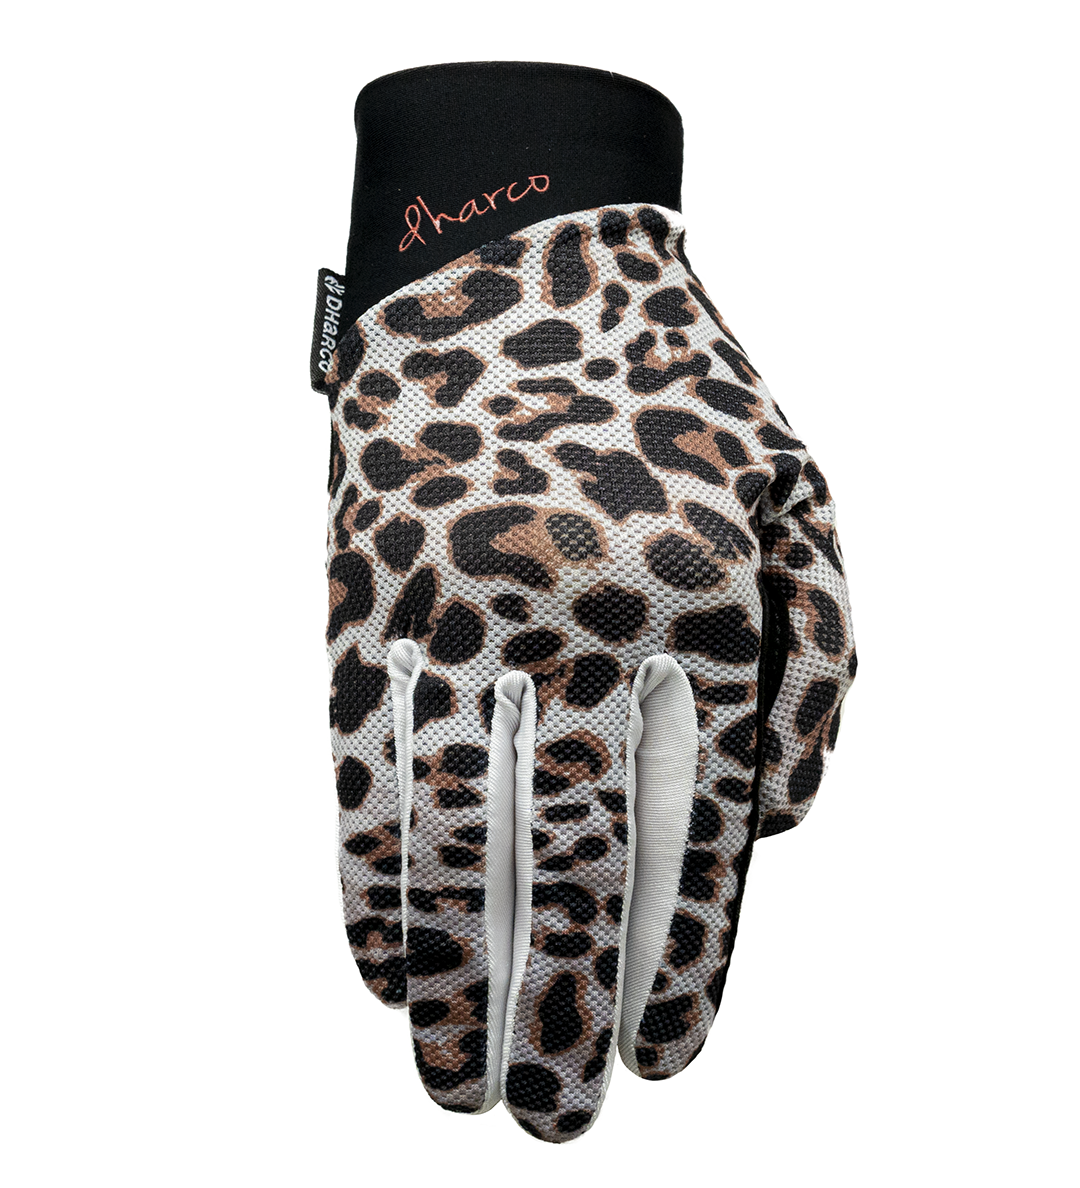 Dharco Women's Gloves, 2022 - Cycle Closet